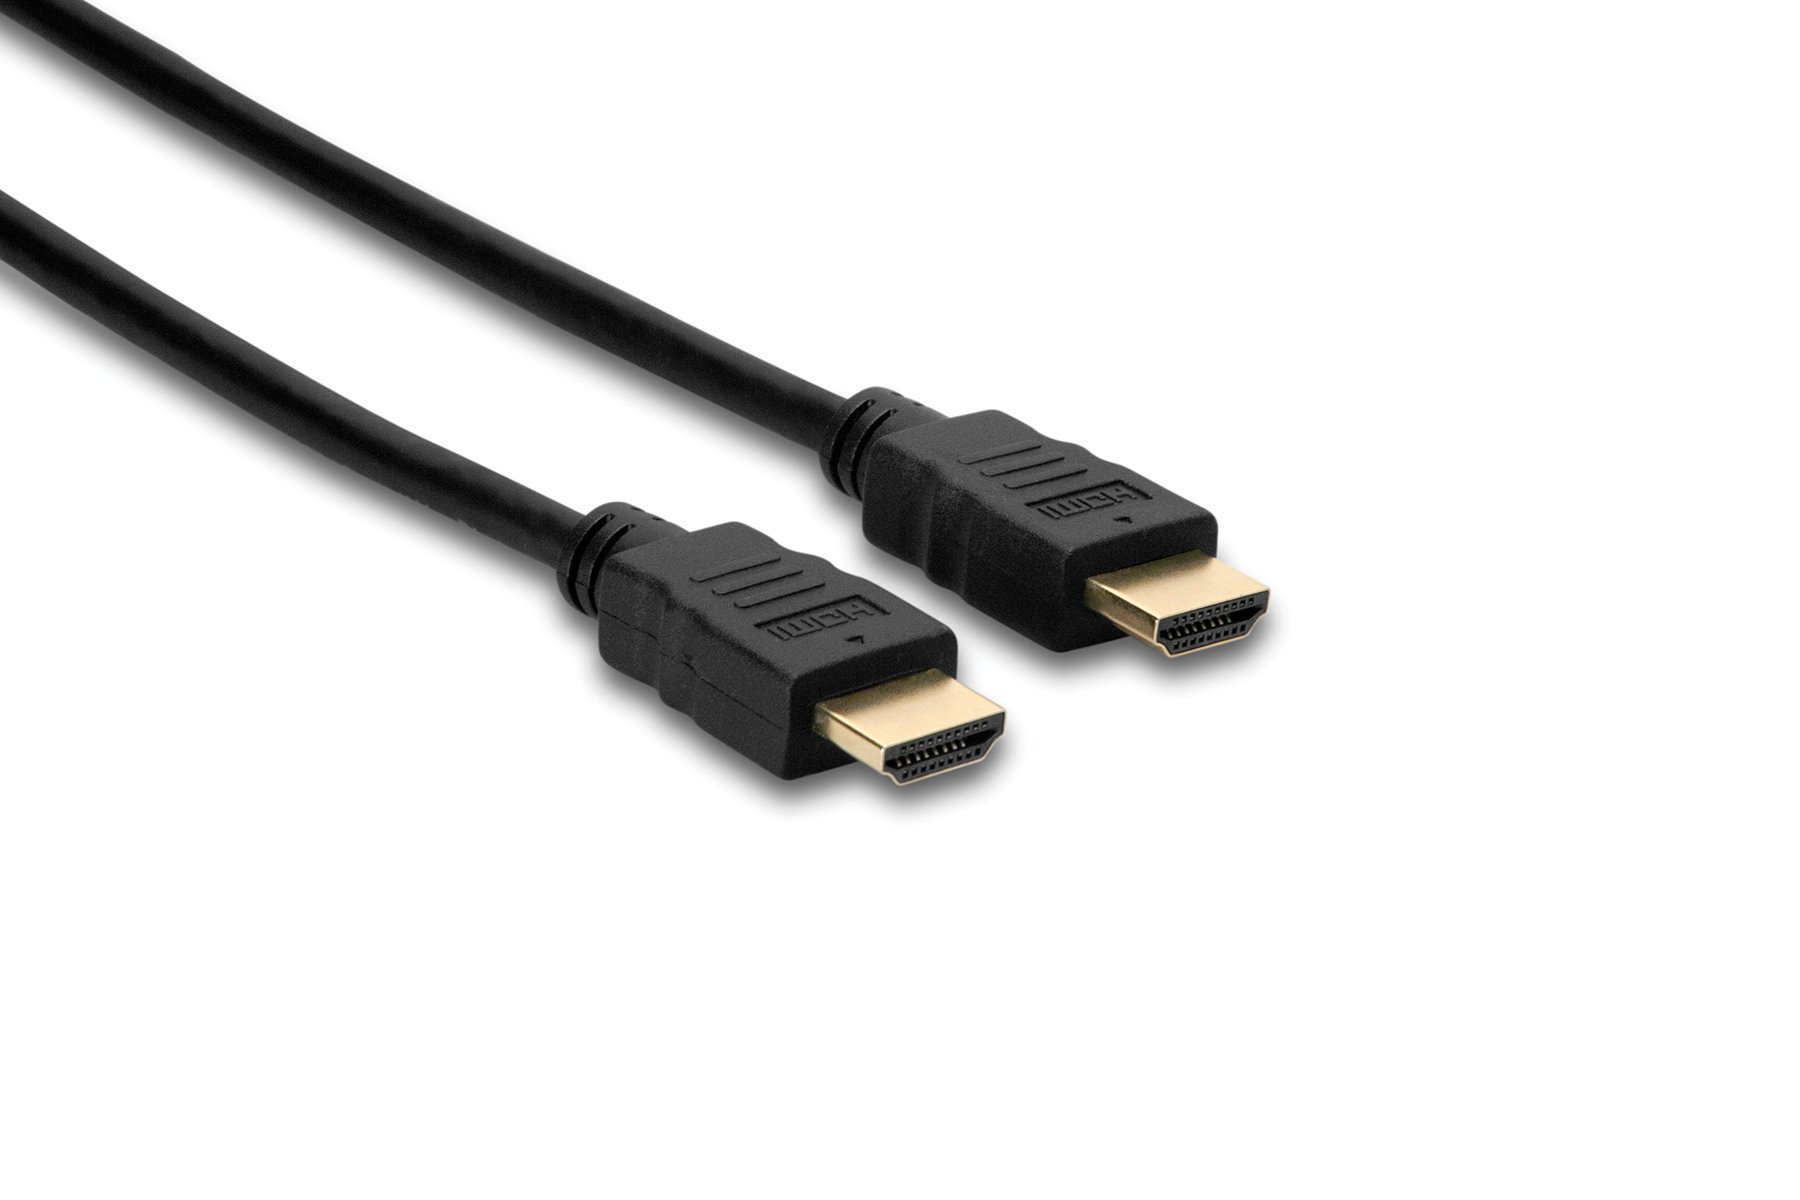 Photos - Cable (video, audio, USB) Hosa HDMA-410 10' HDMI to HDMI High Speed Video Cable with Ethernet 